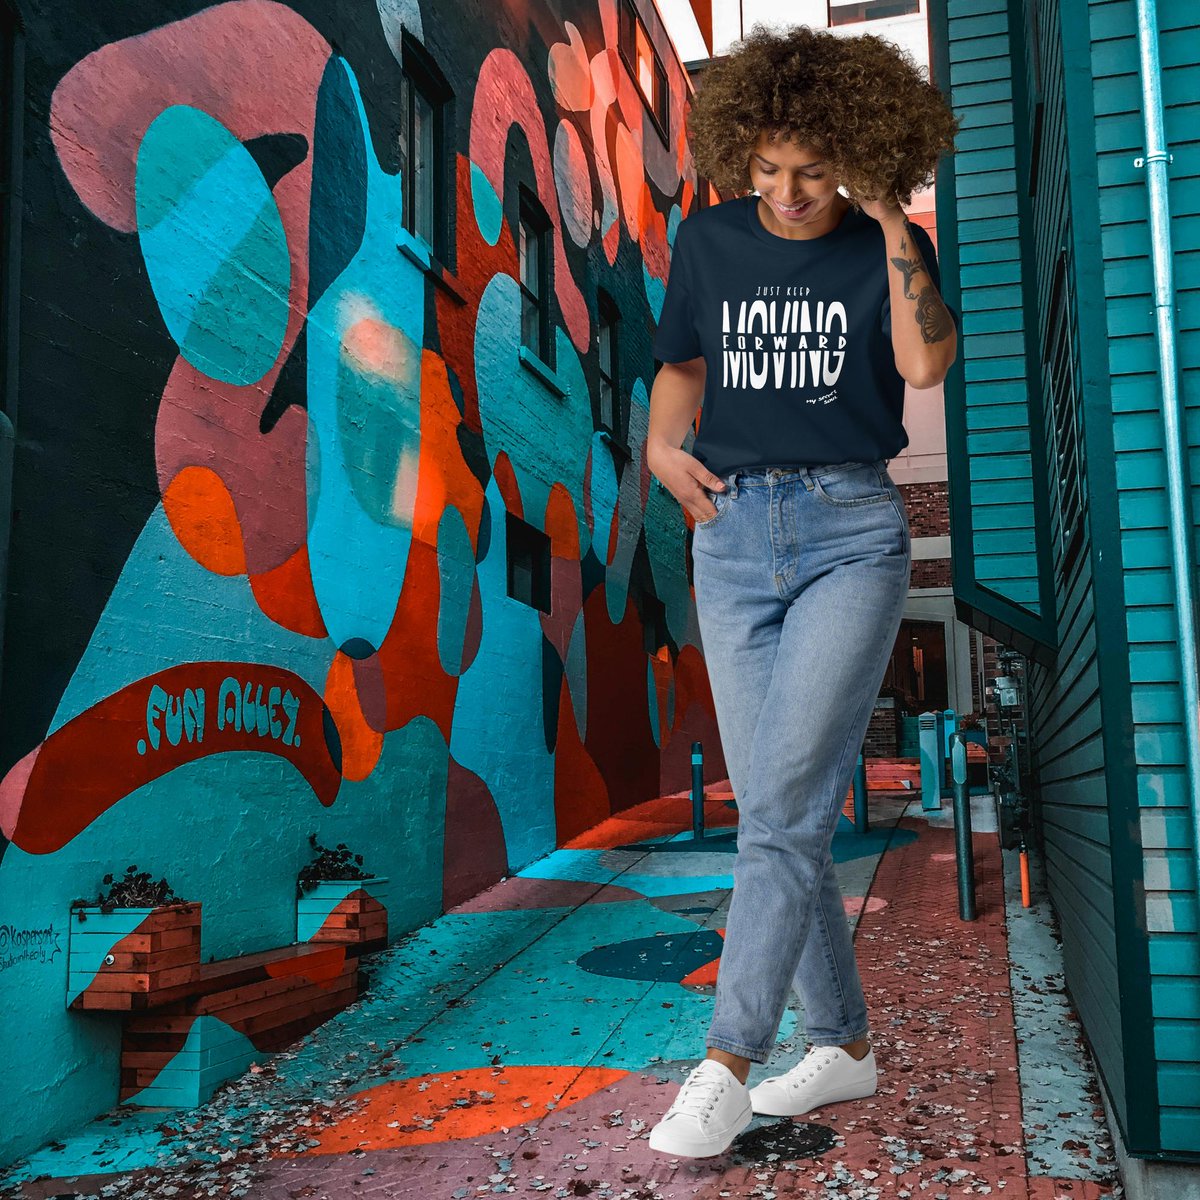 Spotted: our 'Just Keep Moving Forward' tee, making bad hair days look good since... well, forever! 💁‍♂️👚 #FashionFix #PositiveAttitude
ow.ly/tR1t50QYubS

#MySecretSoulStyle #OrganicCottonClothing #EcoFashionBrand #Spring